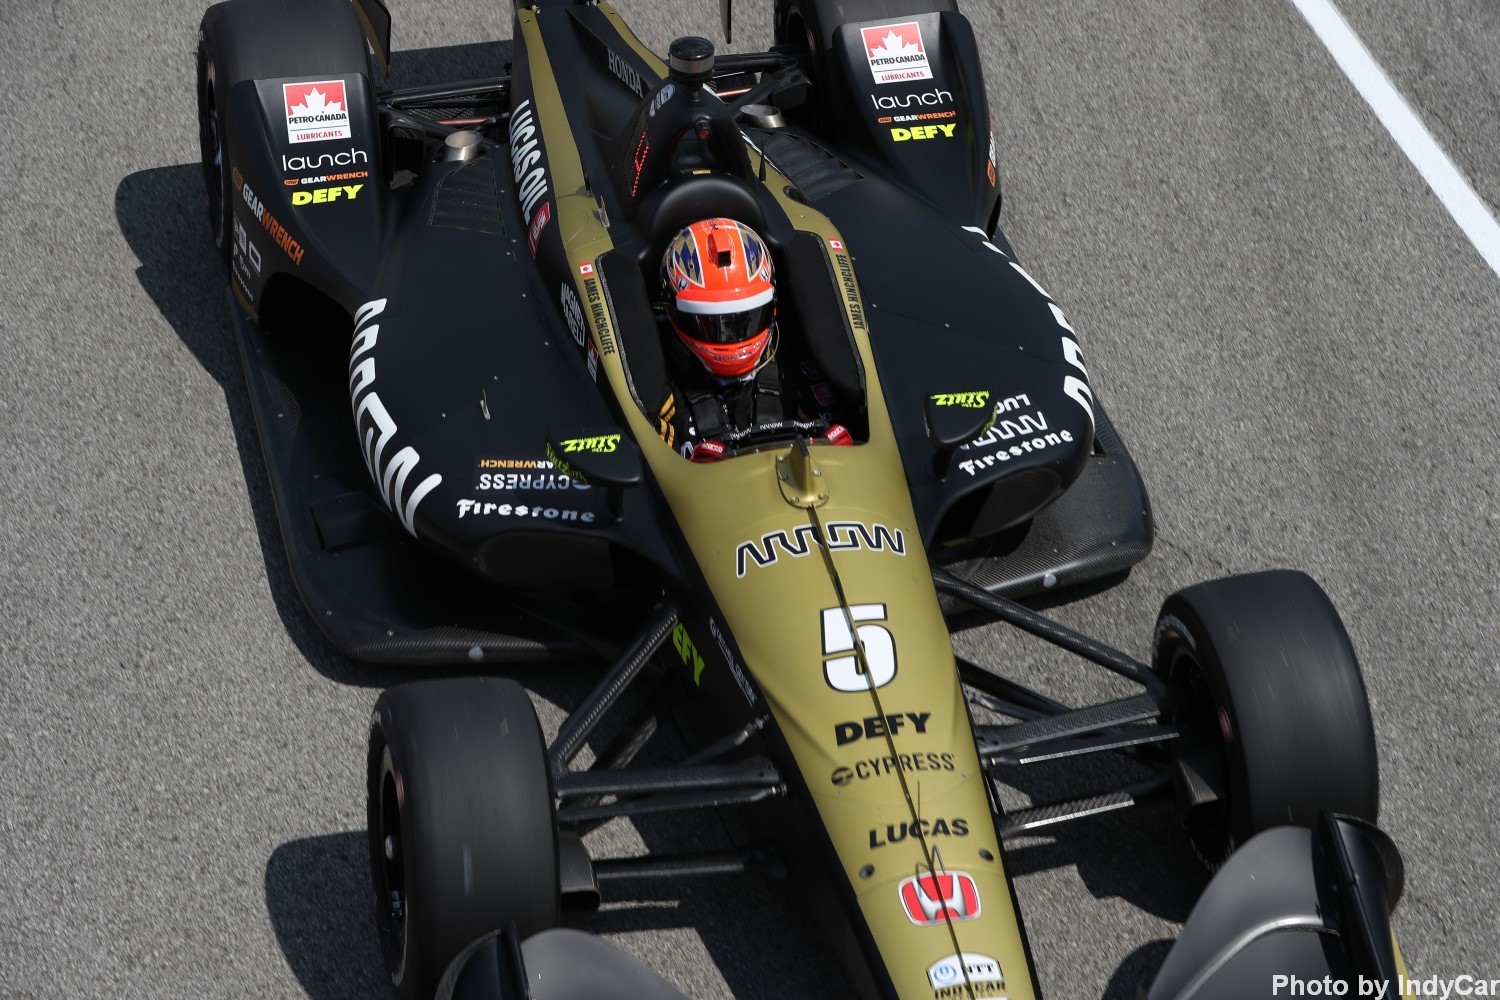 Hinchcliffe in the Arrow SPM Honda. Soon to be Chevy?